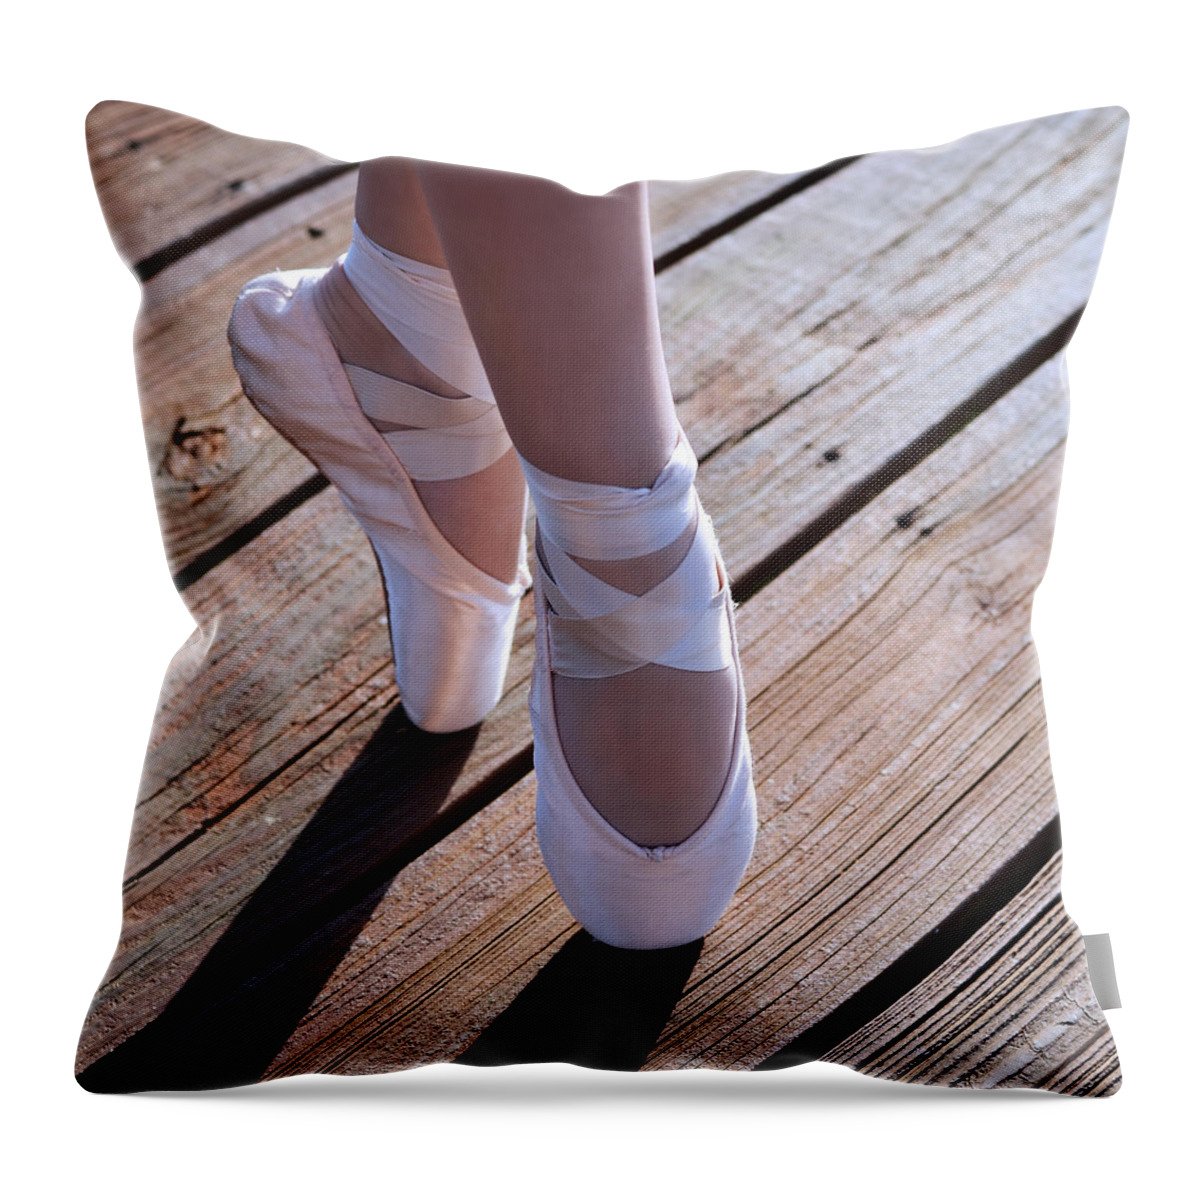 Pointe Shoes Throw Pillow featuring the photograph Pointe Shoes by Laura Fasulo